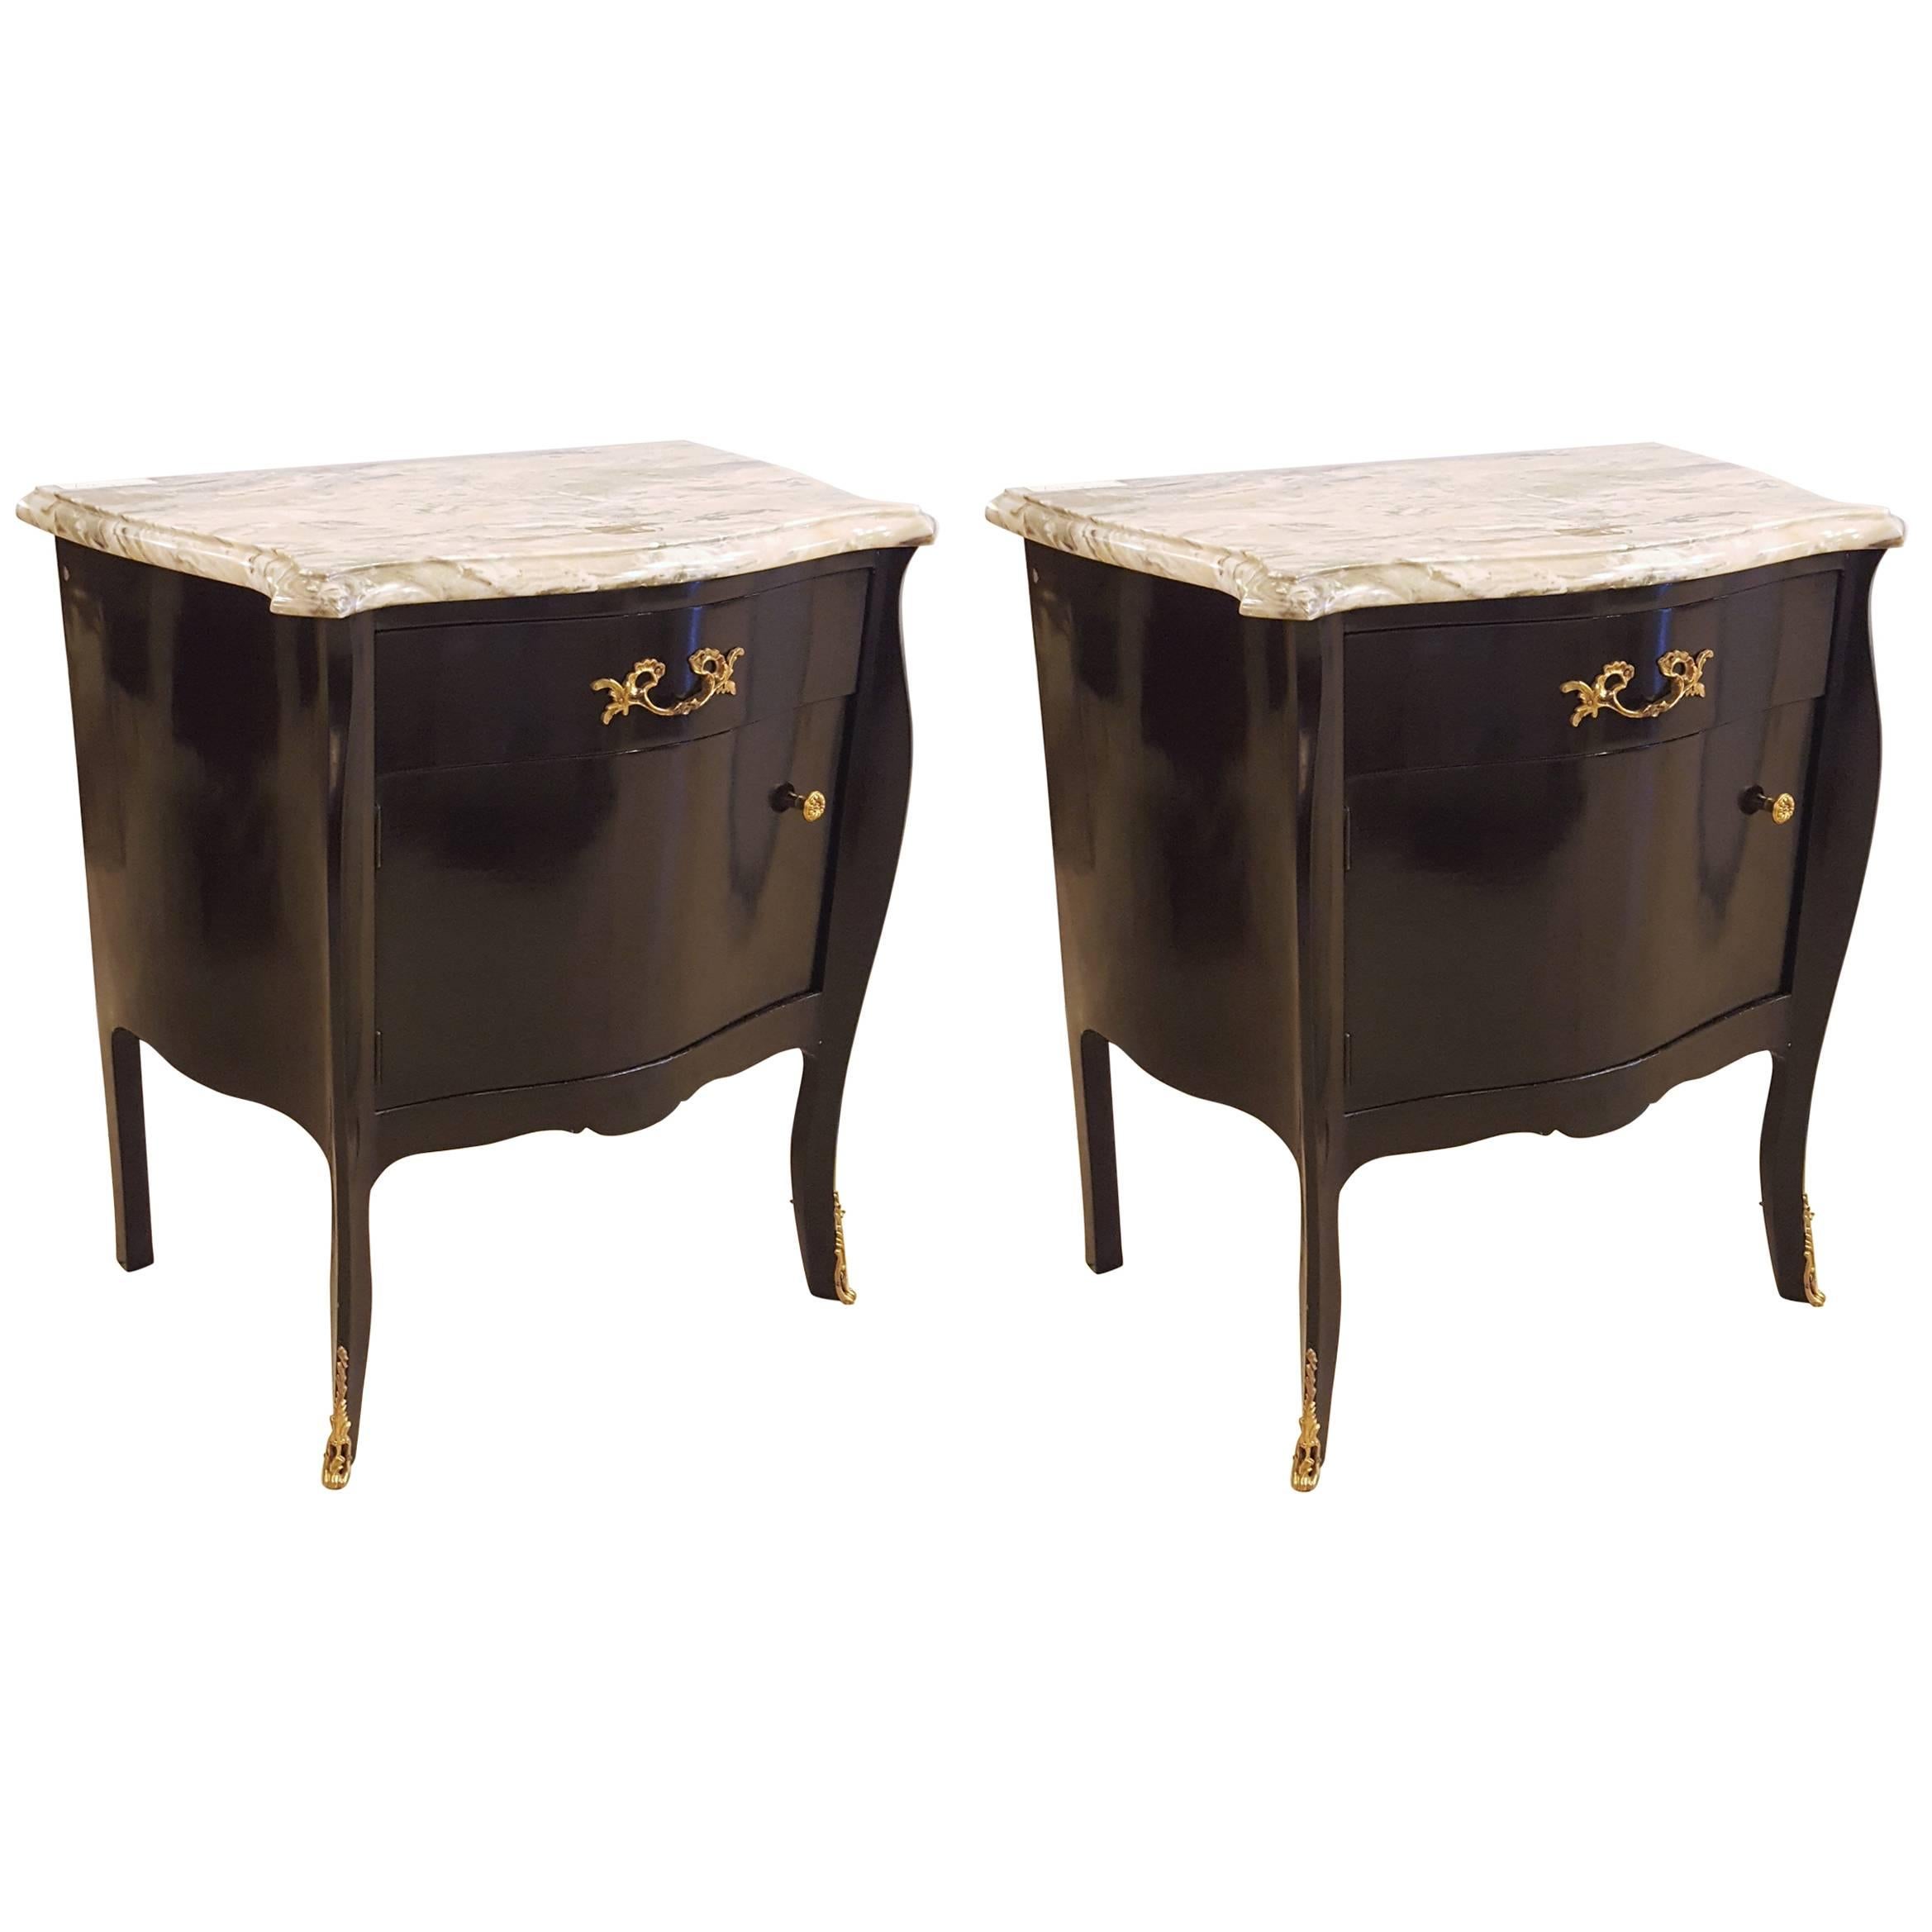 Pair of Hollywood Regency Style Ebonized Marble-Top Nightstands / End Tables